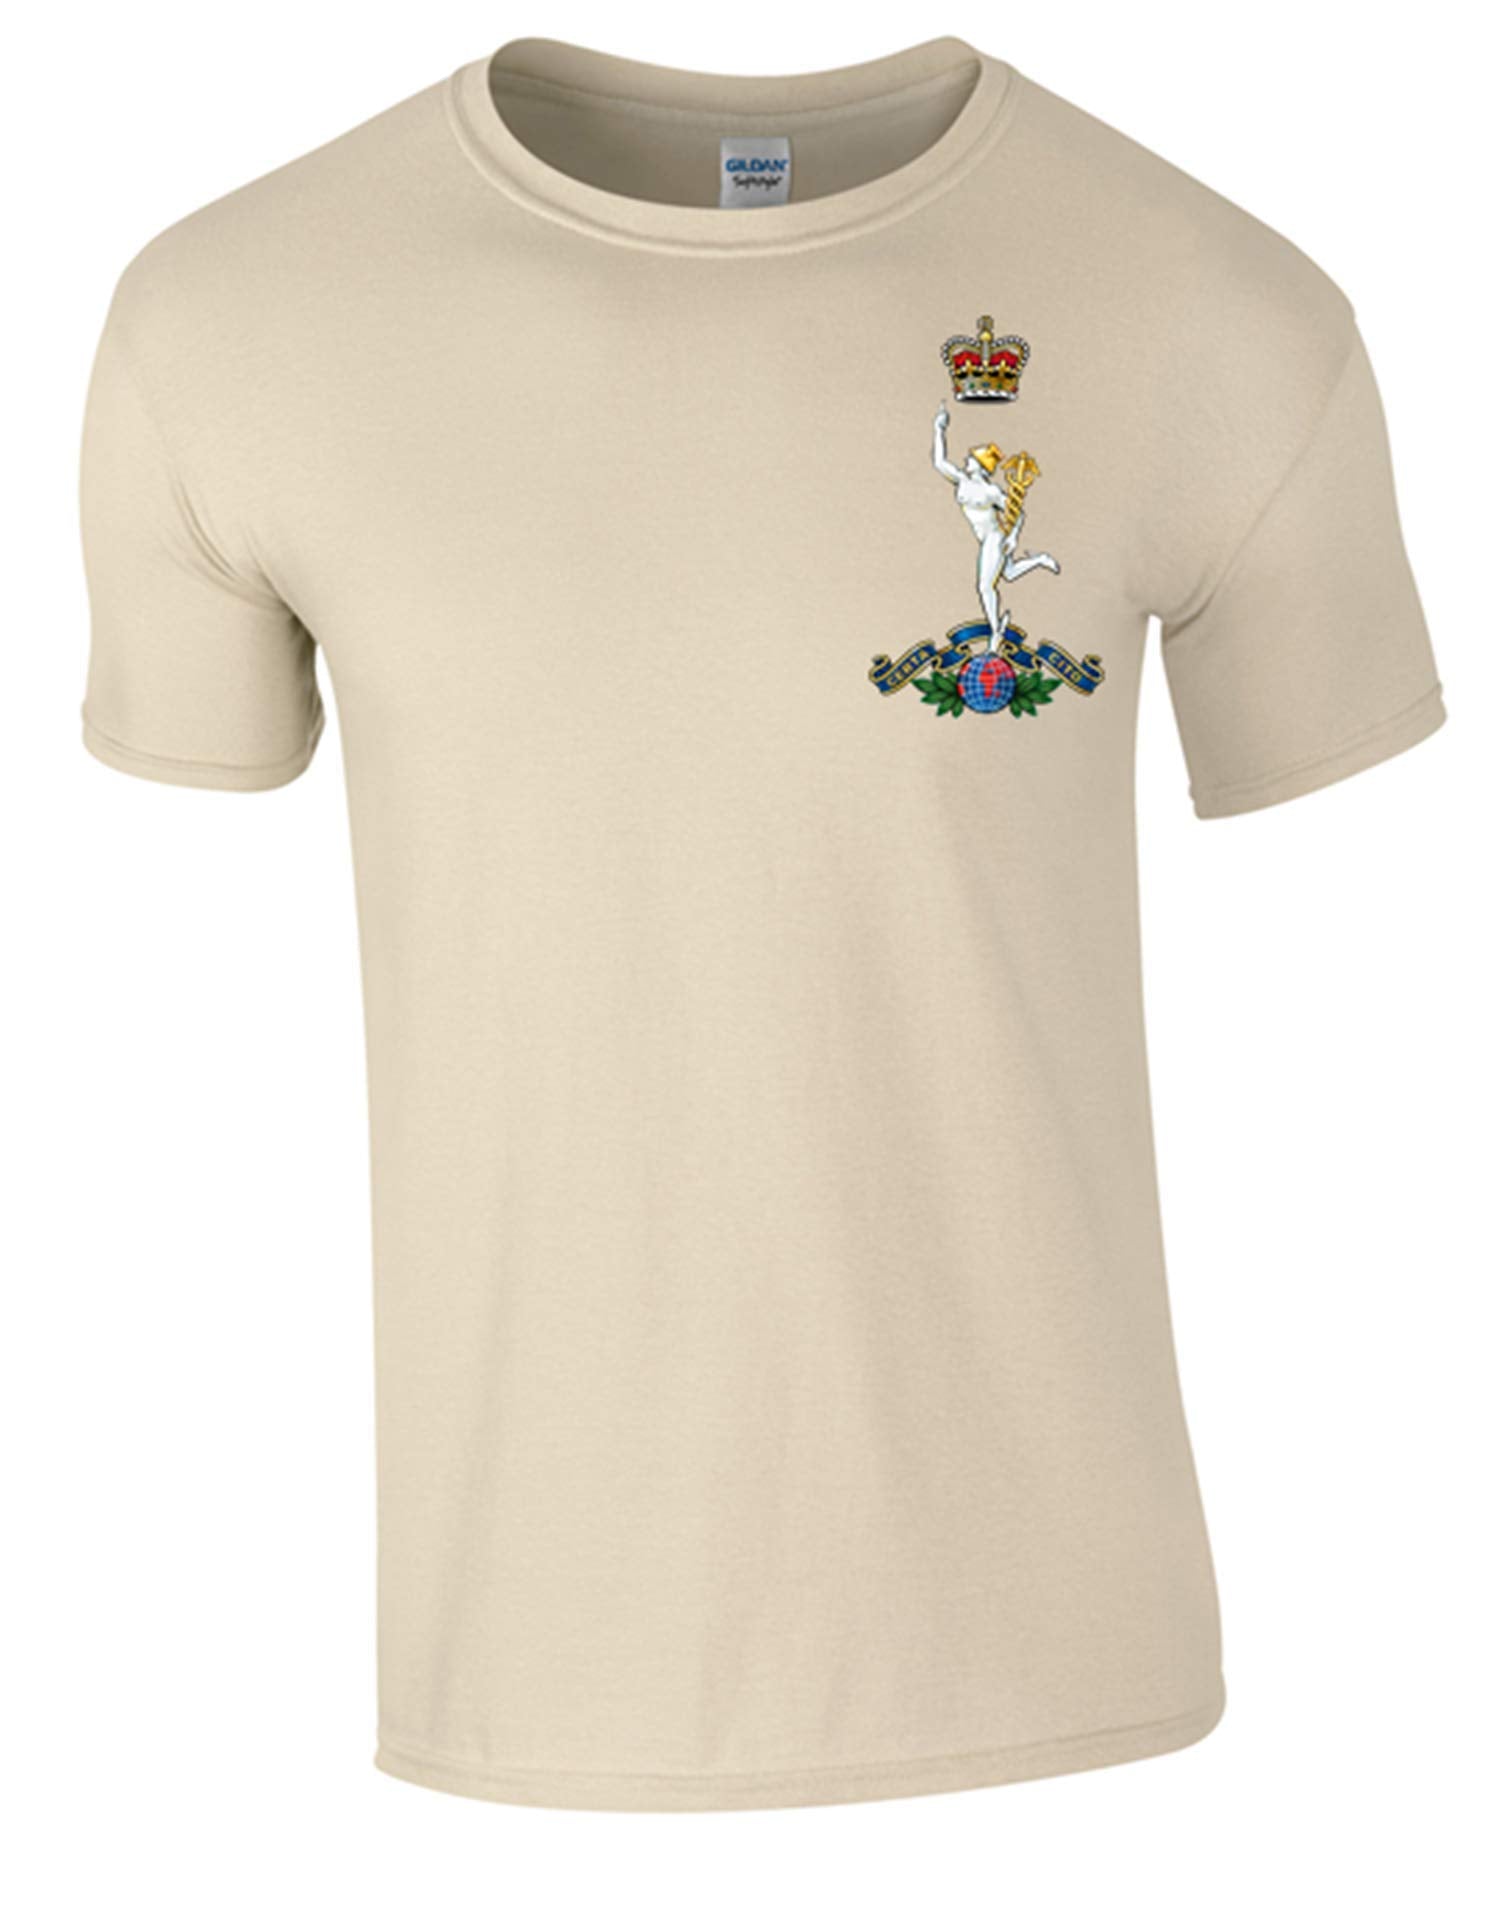 Royal Signals T-Shirt Official MOD Approved Merchandise - Army 1157 kit Sand / S Army 1157 Kit